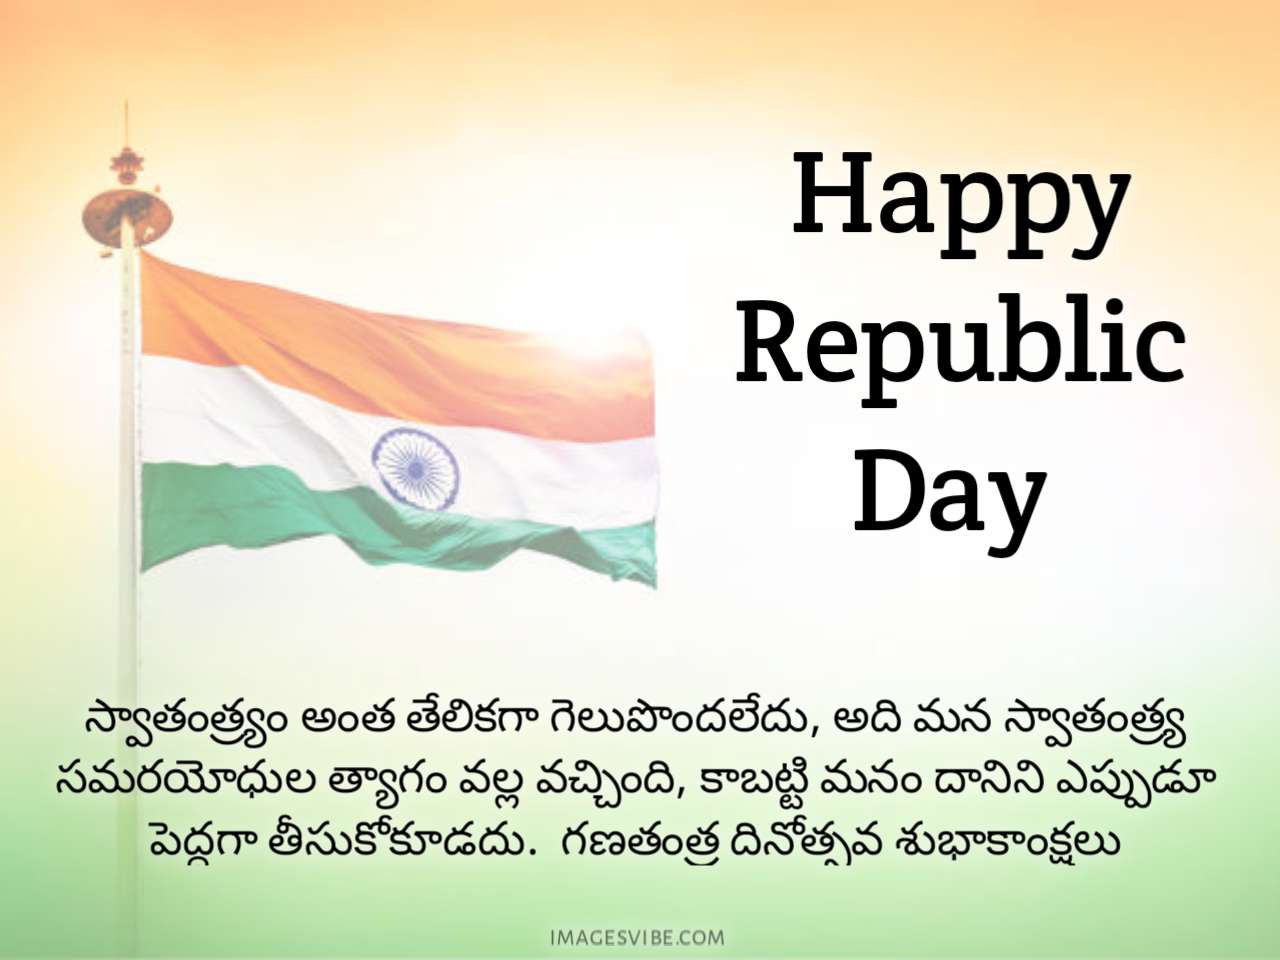 Republic Day Images With Quotes In Telugu